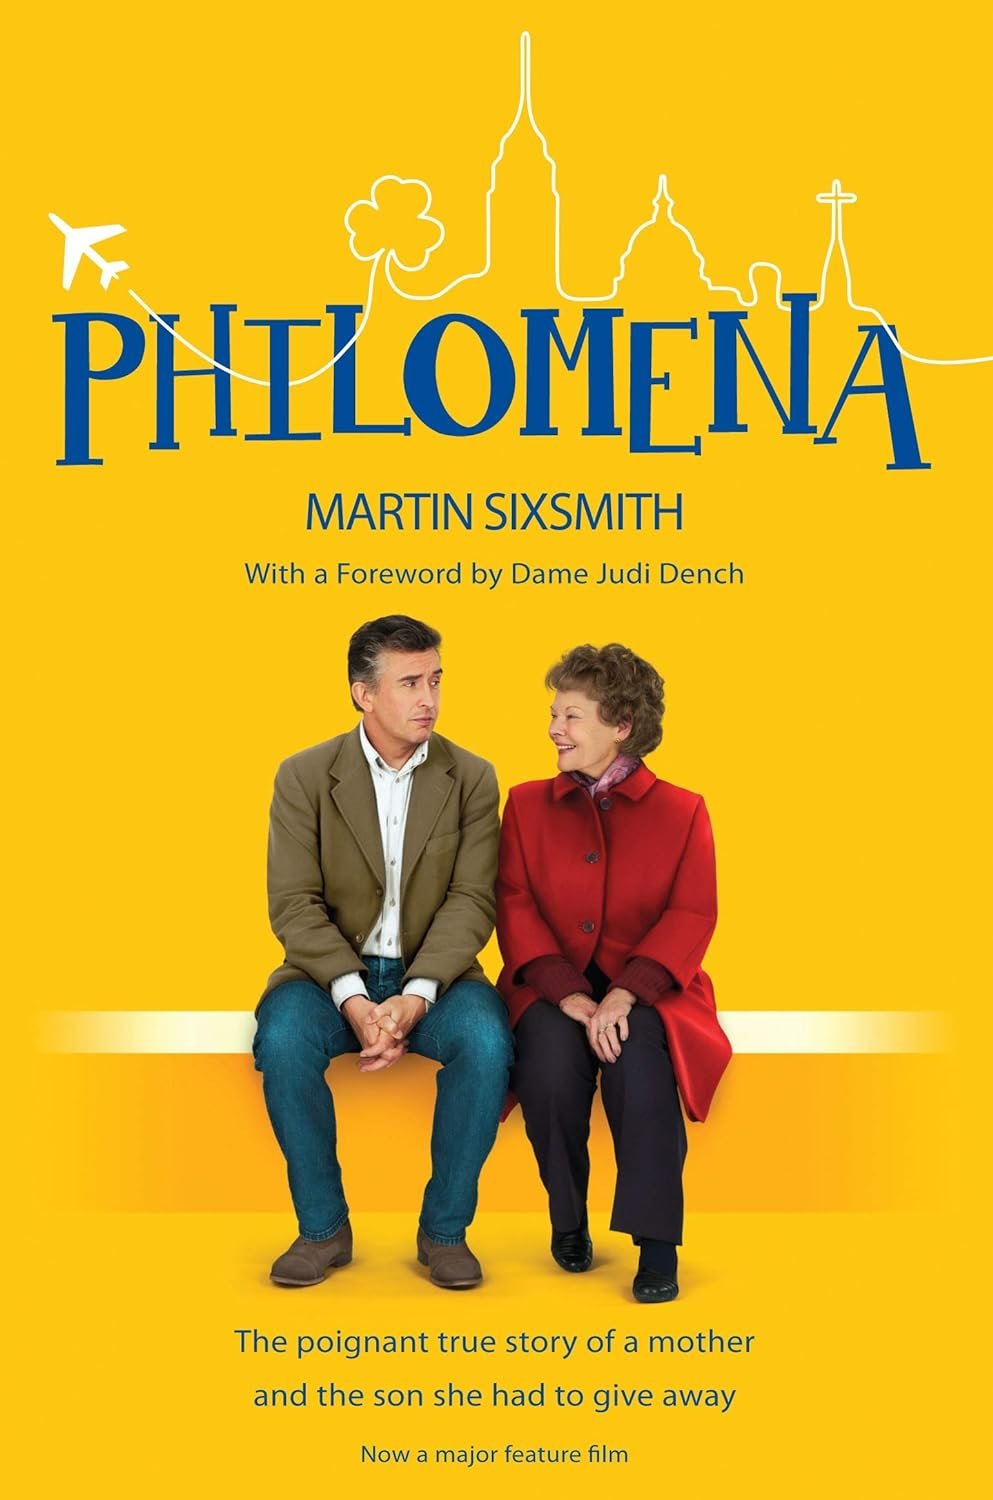 Book cover of "Philomena: The True Story Of A Mother And The Son She Had To Give Away" by Martin Sixsmith, featuring a man and woman sitting side by side against a yellow background, depicting a true story with a city skyline and an airplane silhouette.